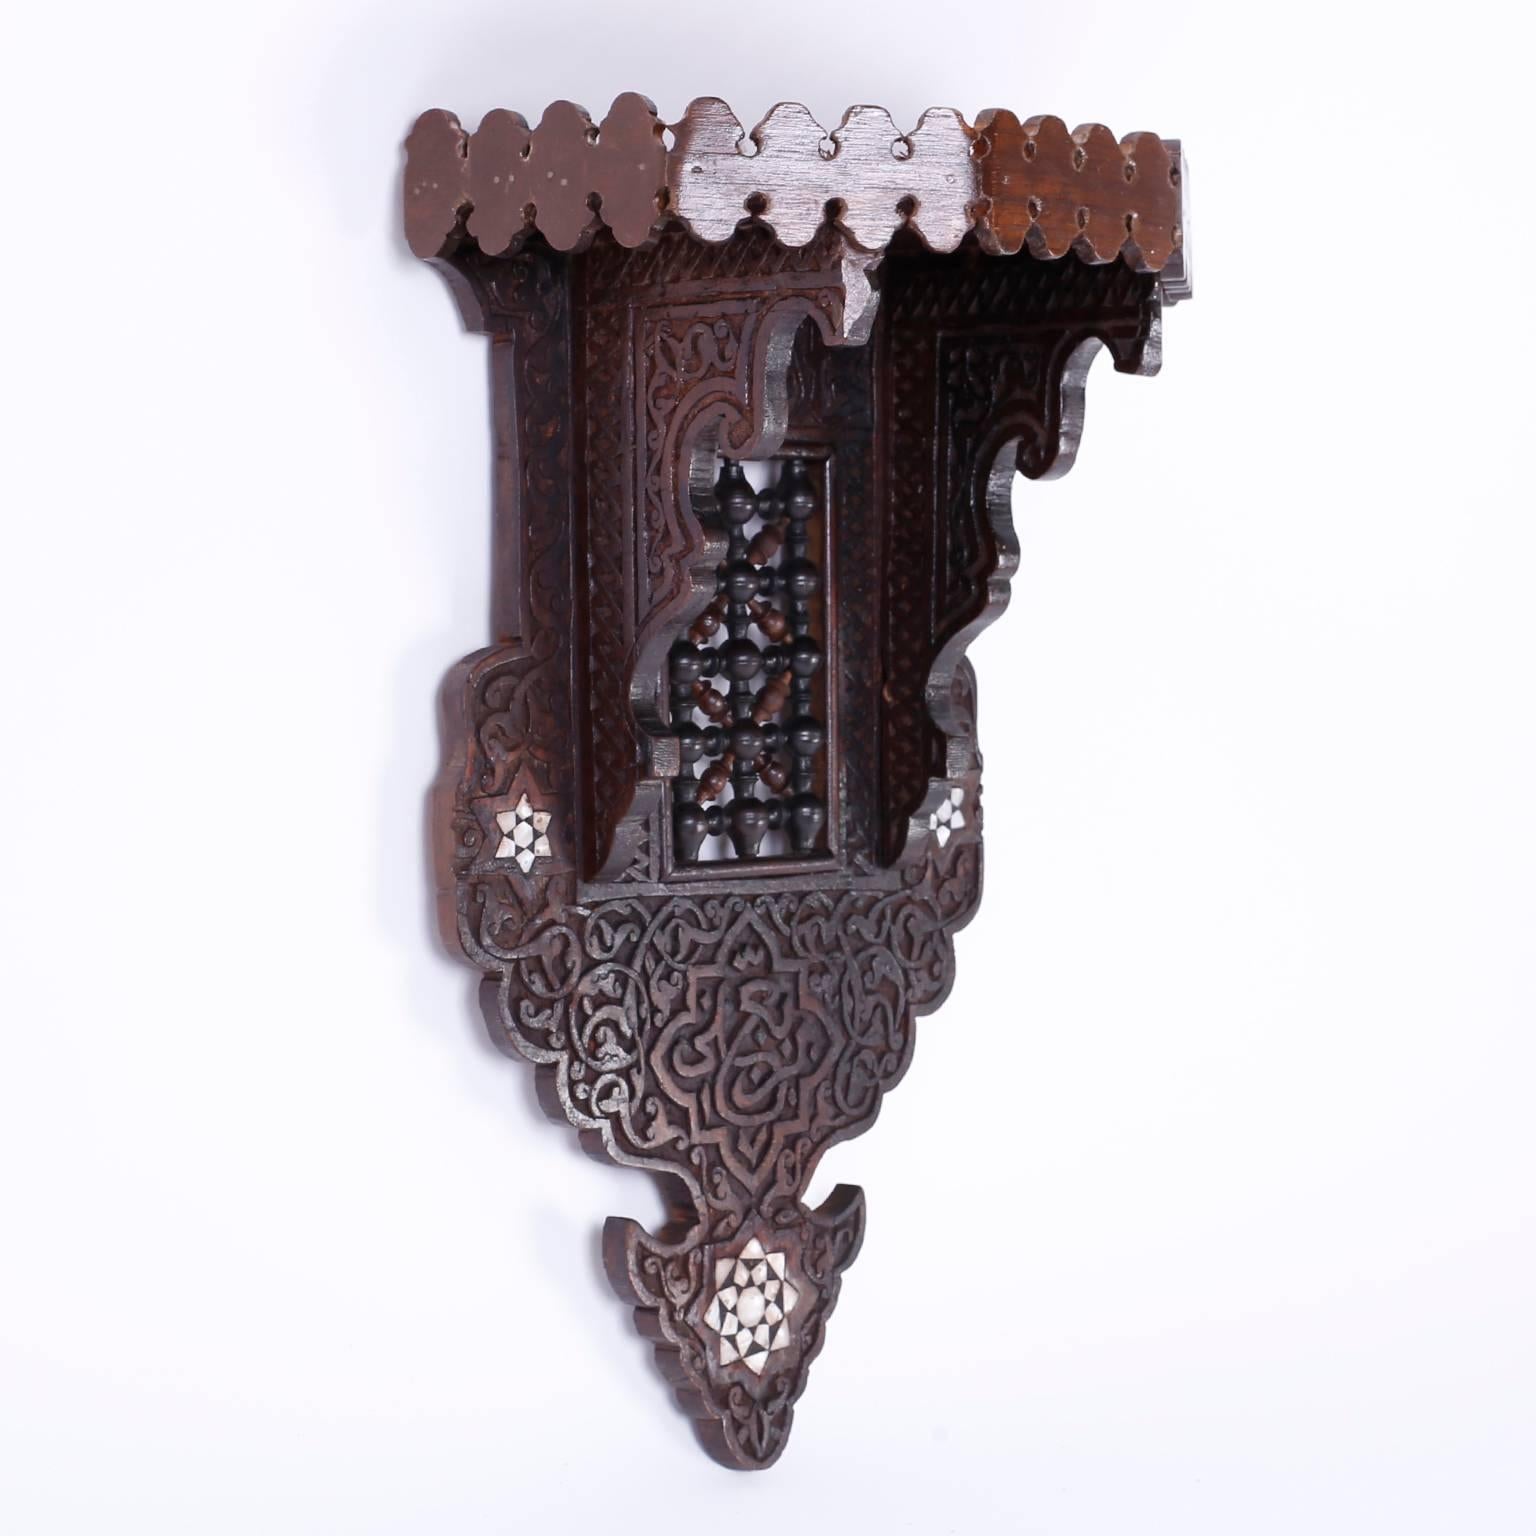 Fascinating Moroccan wall bracket with a rampart gallery around the shelf, elaborate floral carvings, a stick and ball center panel and three inlaid mother-of-pearl stars.